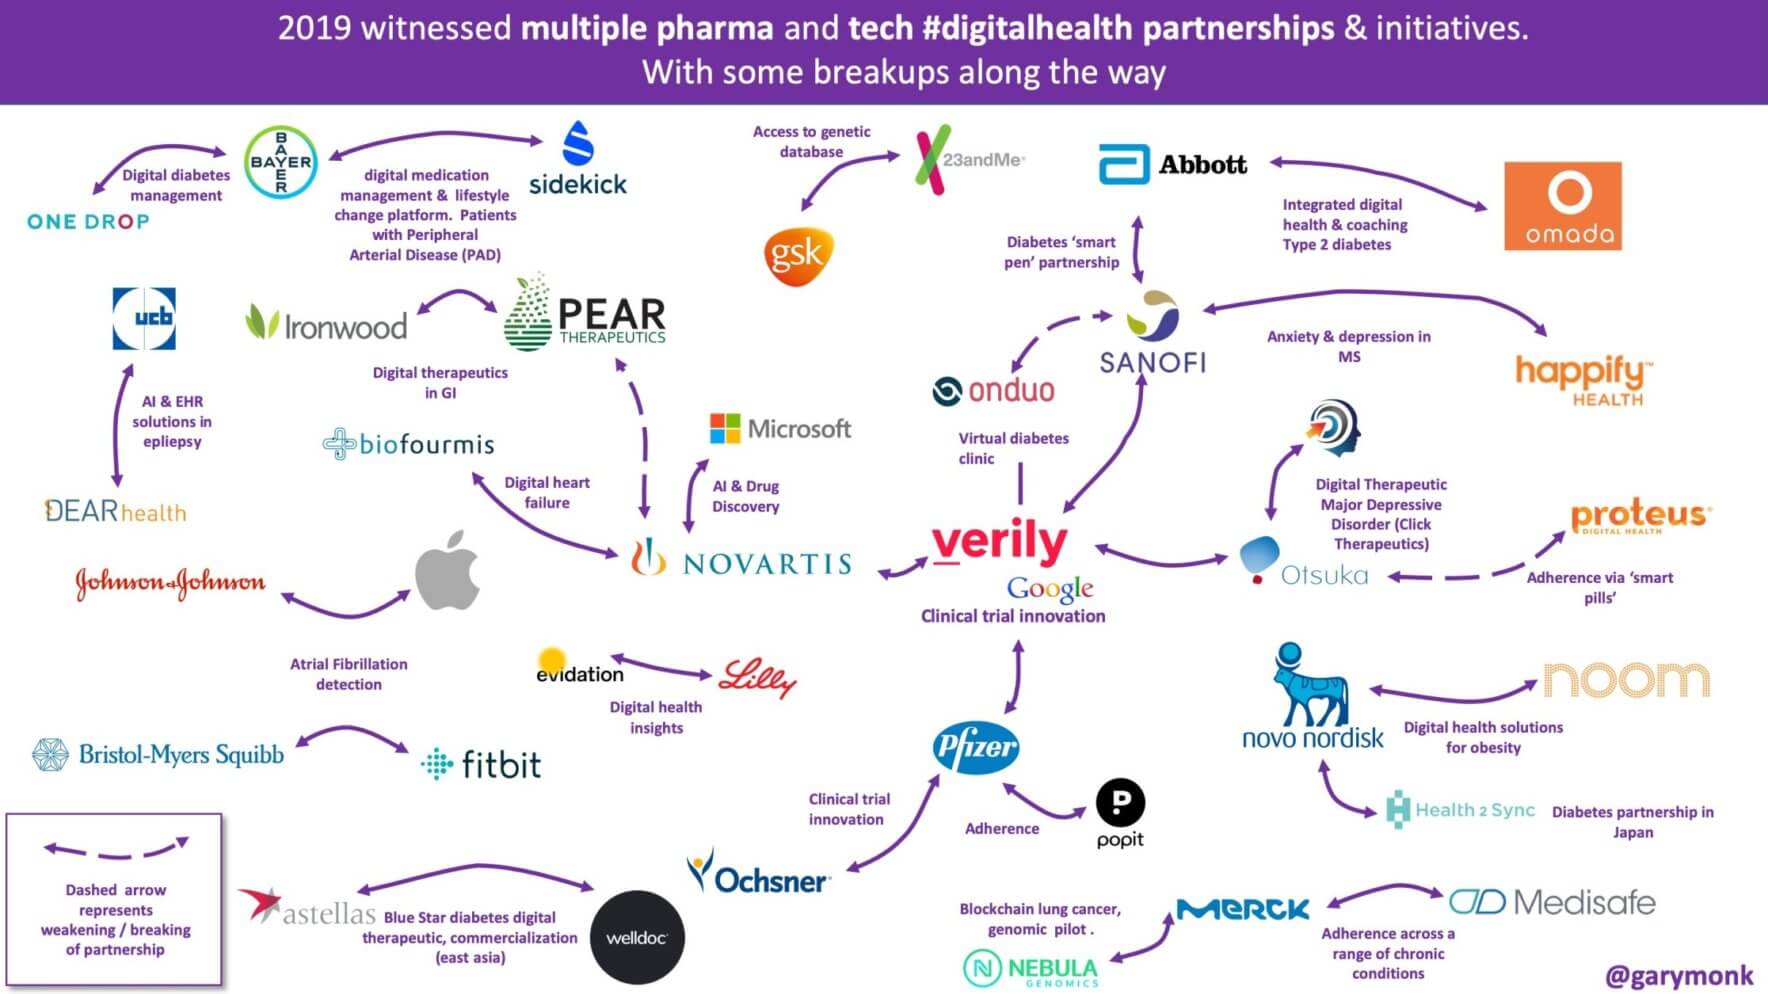 Illustration showing pharma and tech partnerships and initiatives in 2019.